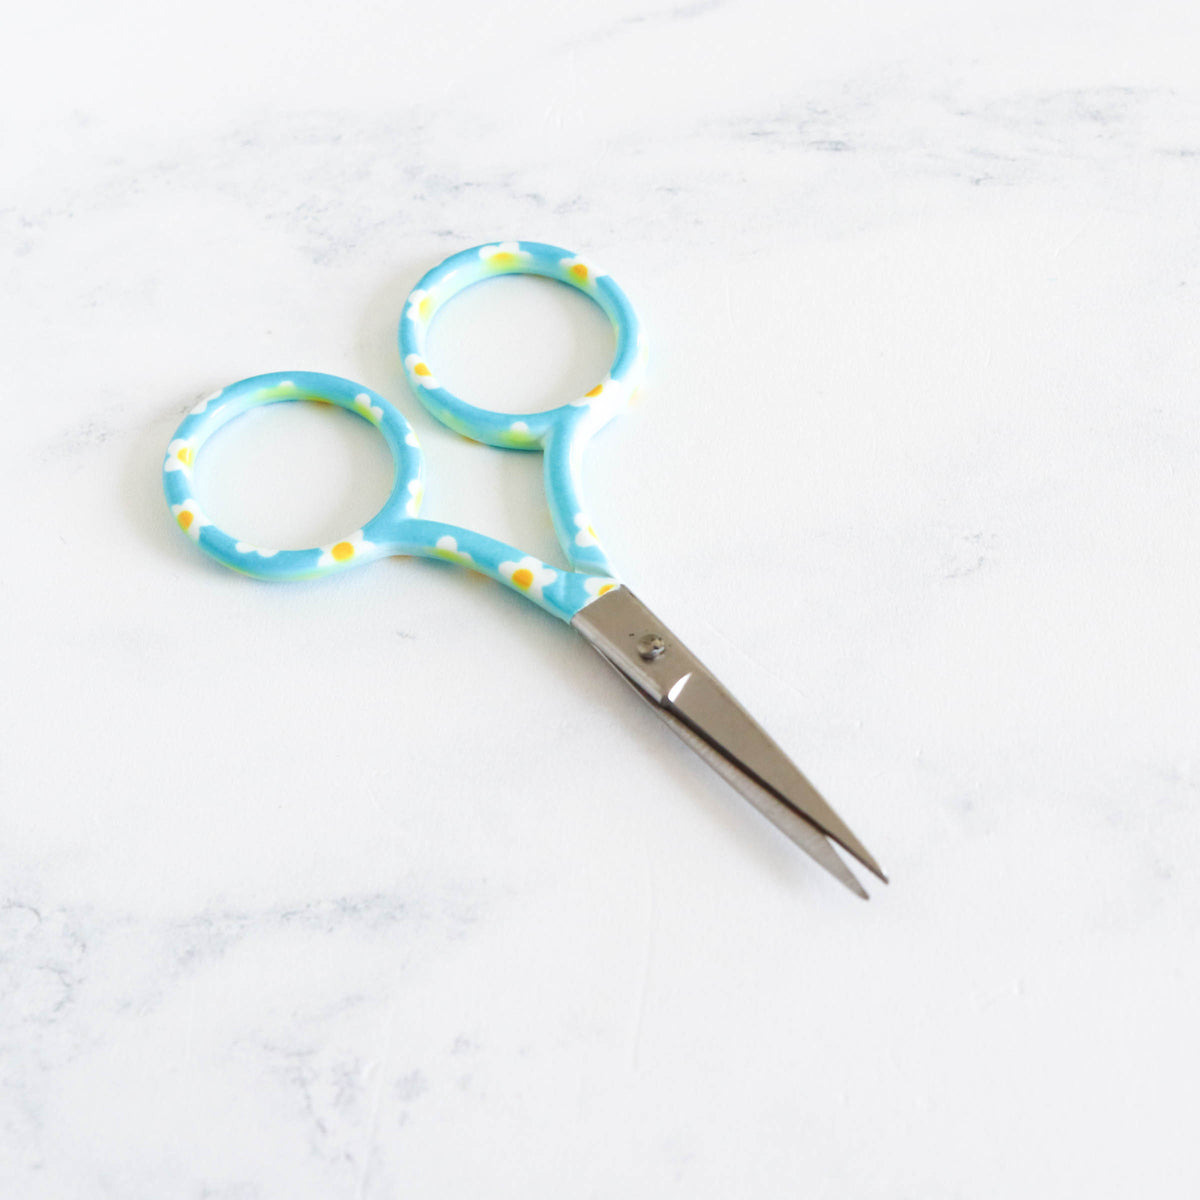 Patterned Embroidery Scissors - Blue and Yellow Floral